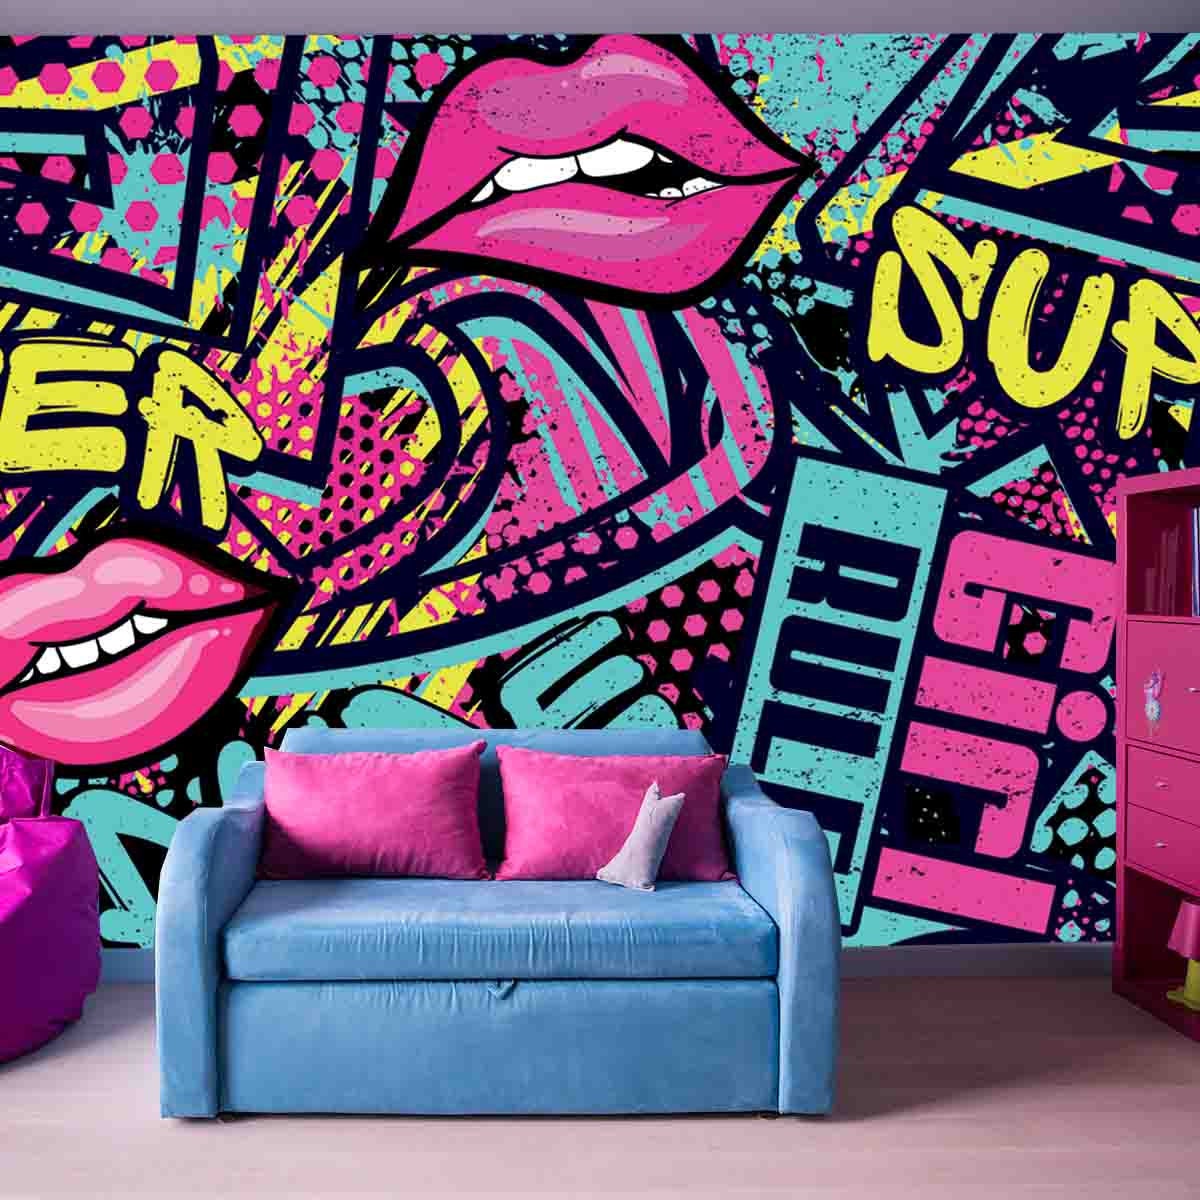 Abstract Seamless Fashion Print. Repeated Graffiti Style Pattern Wallpaper Teen Girl Bedroom Mural